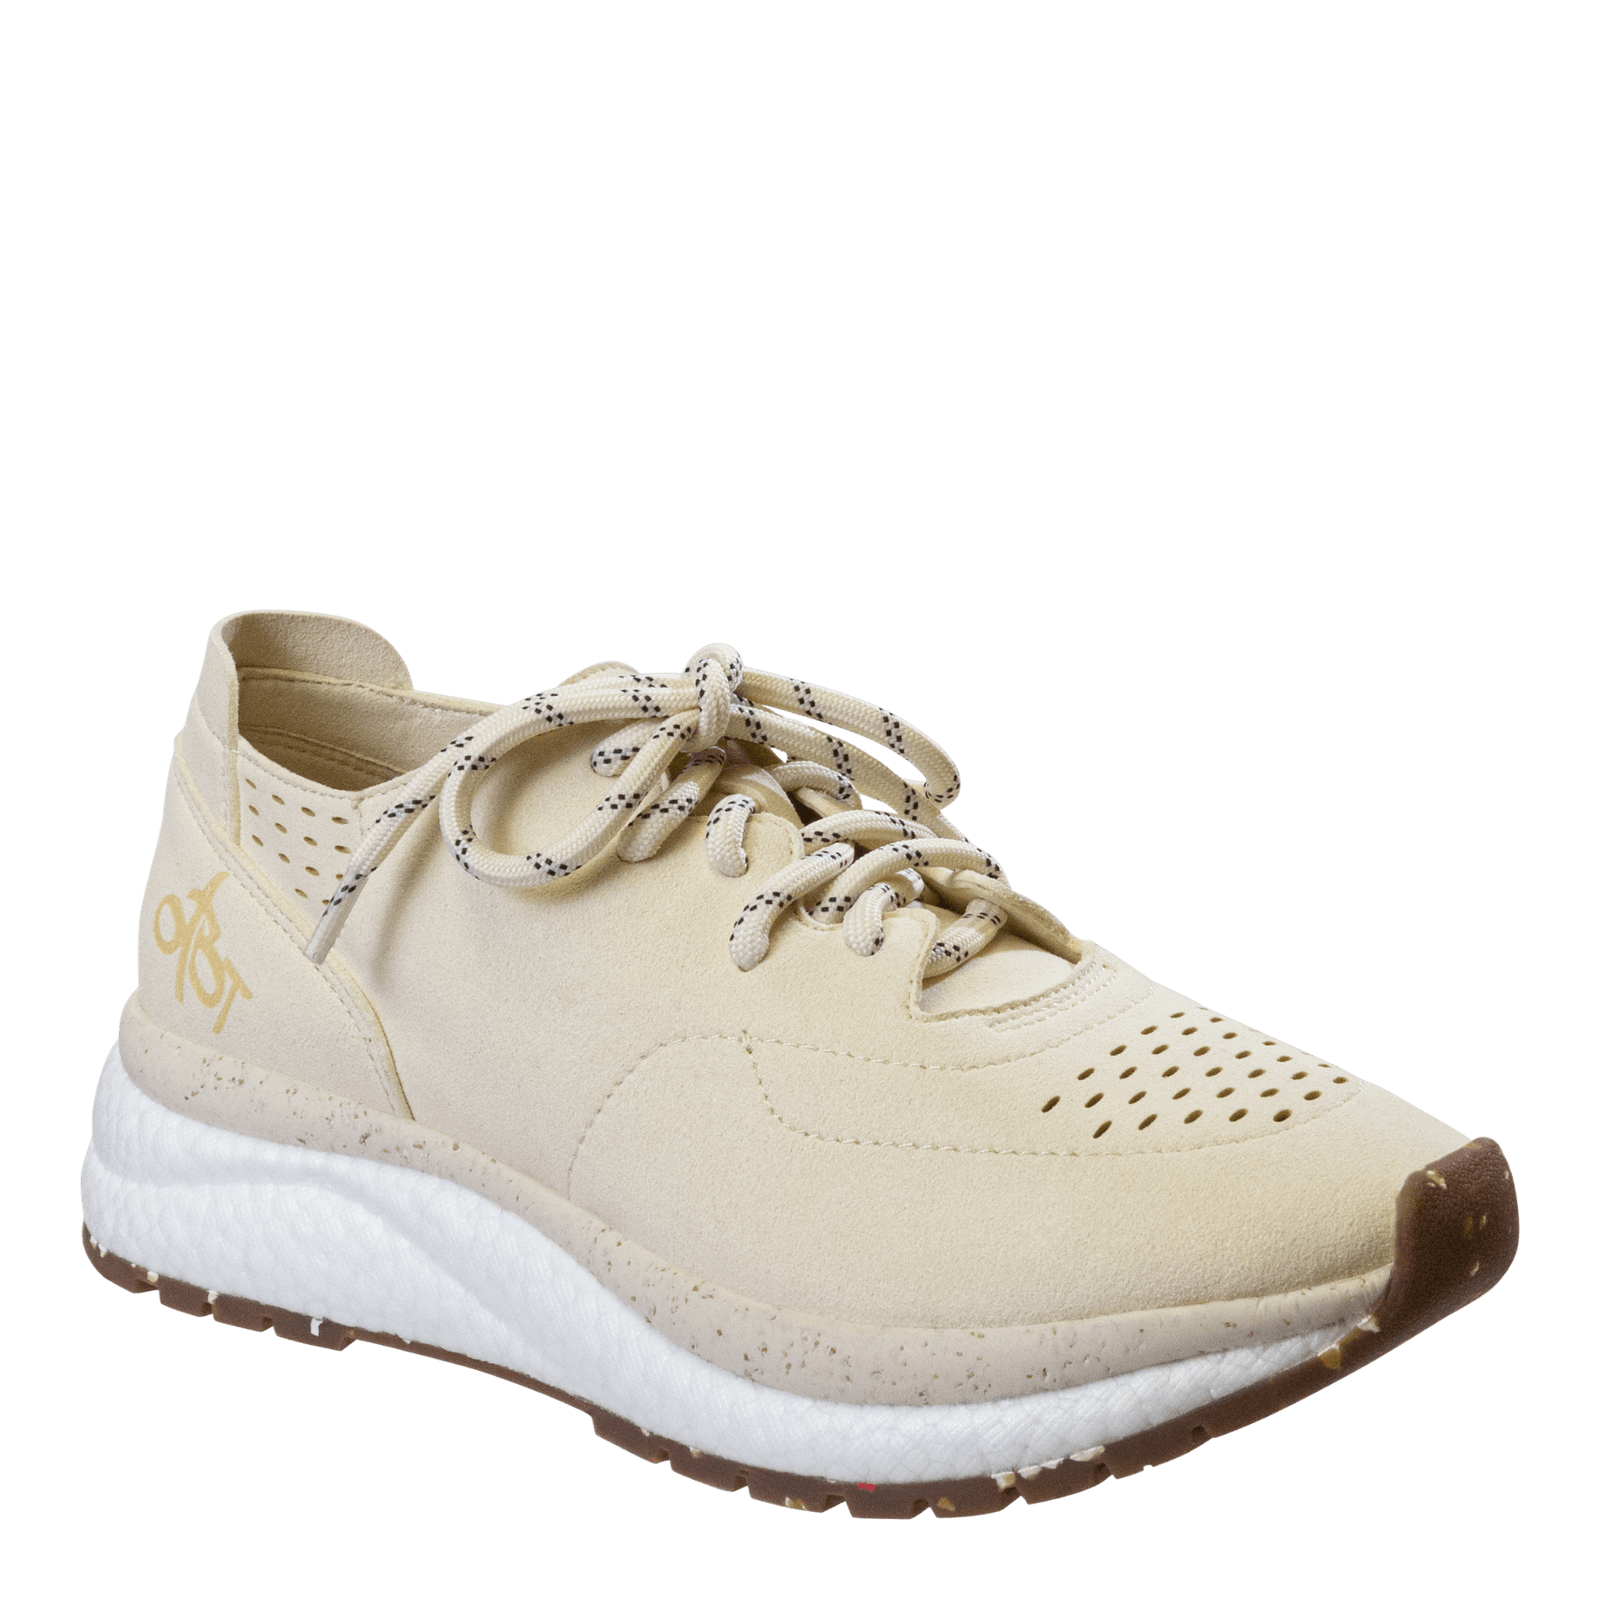 FREE in CHAMOIS Sneakers